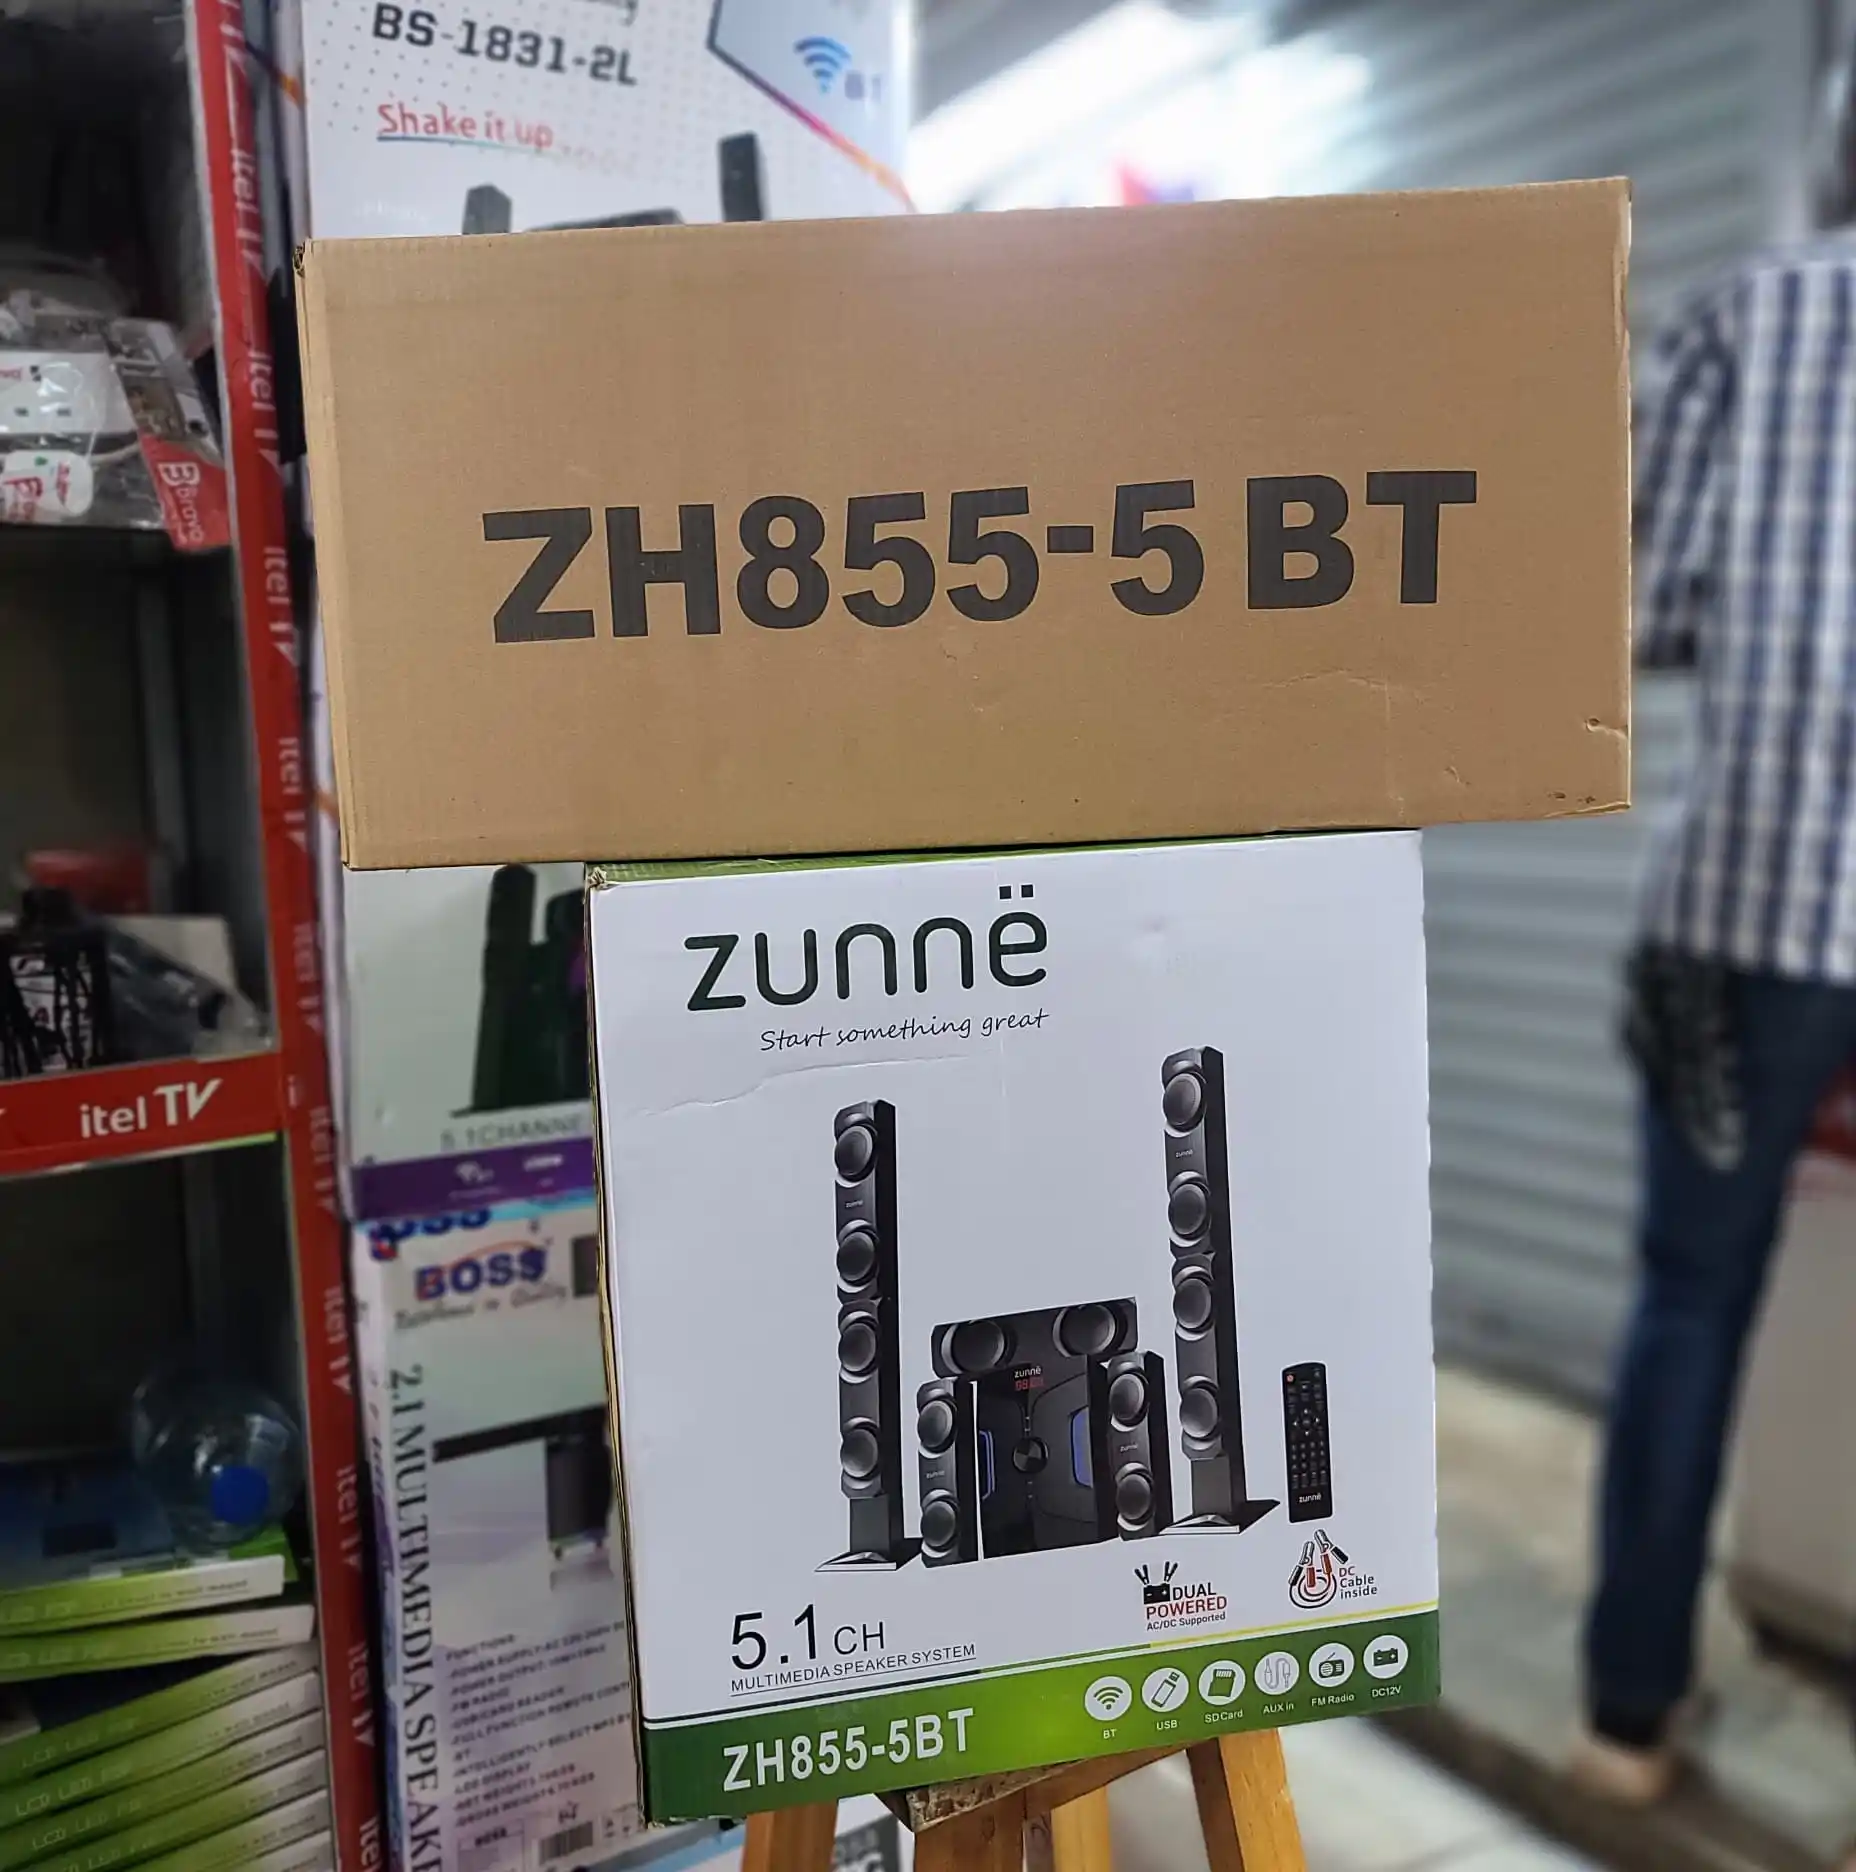 Zunne 855 [Zh 855-5Bt] Subwoofer 5 Speakers With Bluetooth,Sd Card,Flash Port,Aux,High Bass,,